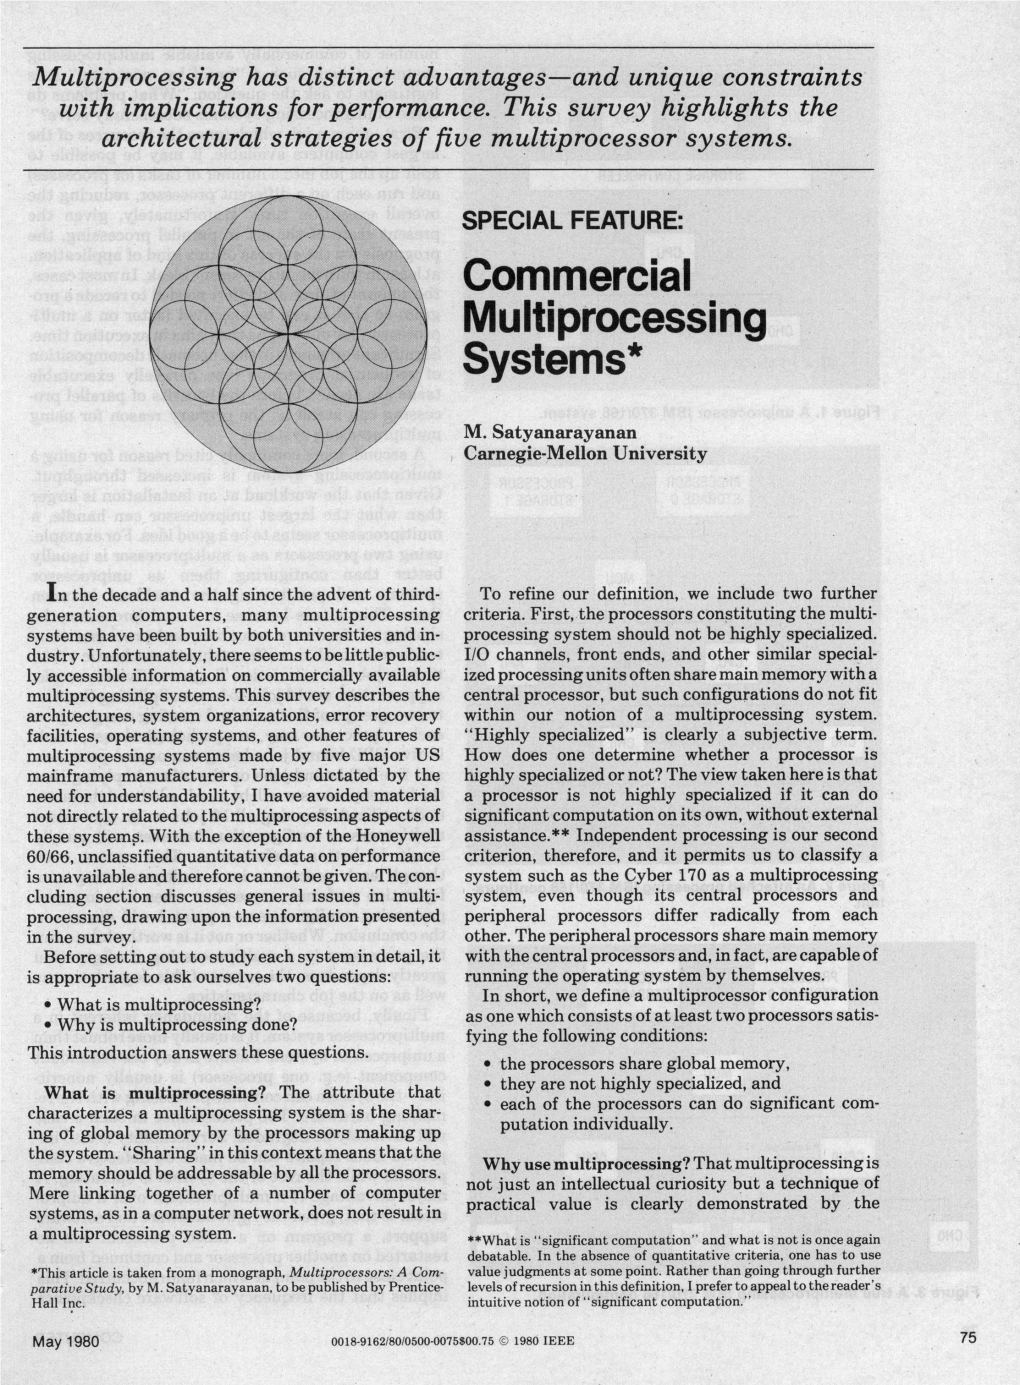 Commercial Multiprocessing Systems*